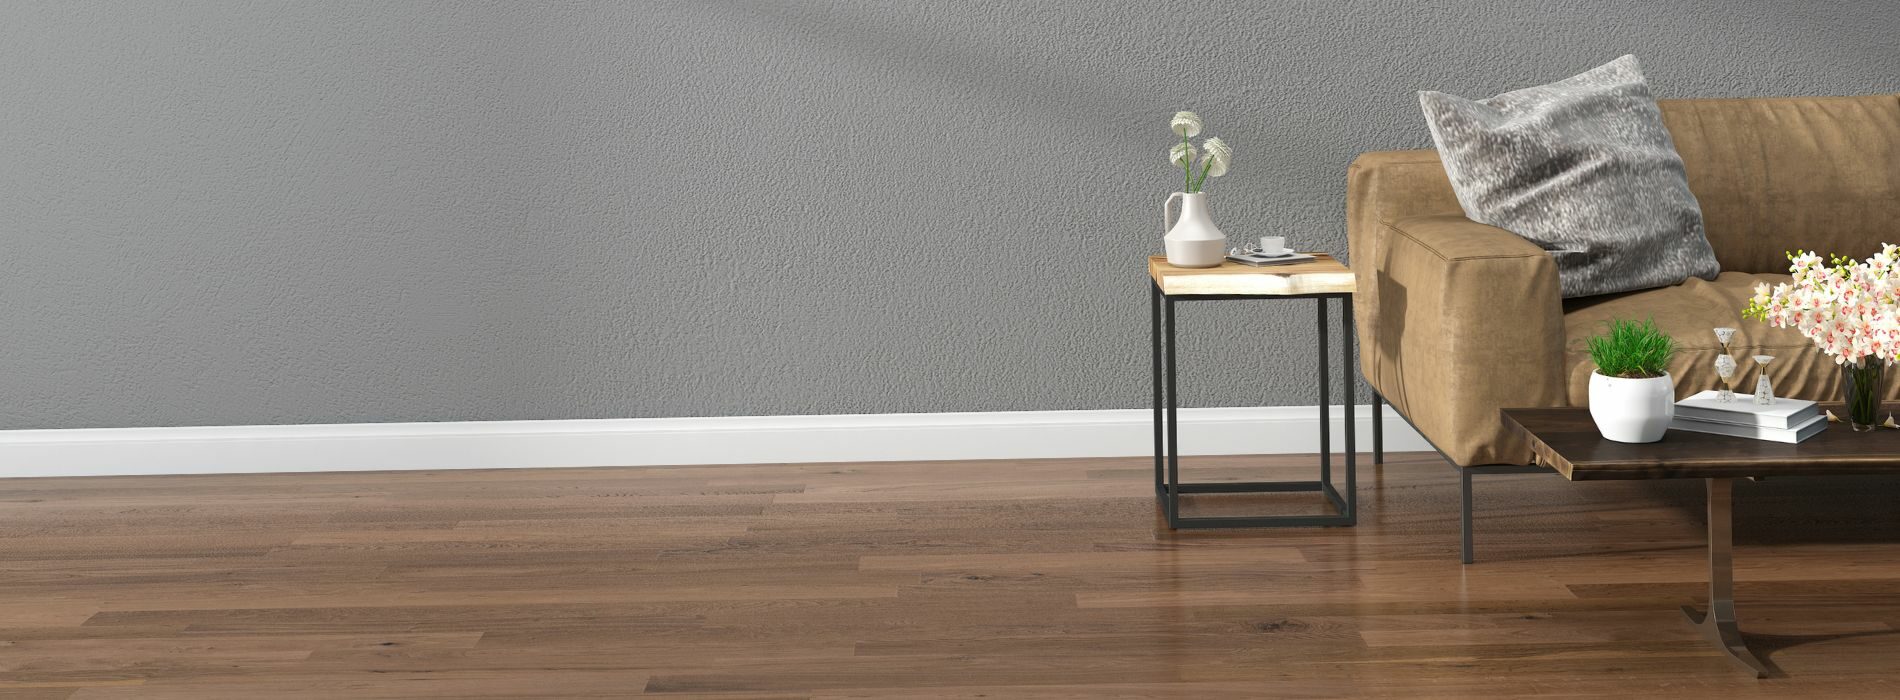 Professionally restored 6-year-old hardwood floor in Isleworth, TW7. Mr Sander® employed Bona 2.5K Frost whitewashing and Traffic HD 15% sheen matte lacquer for exceptional results. 